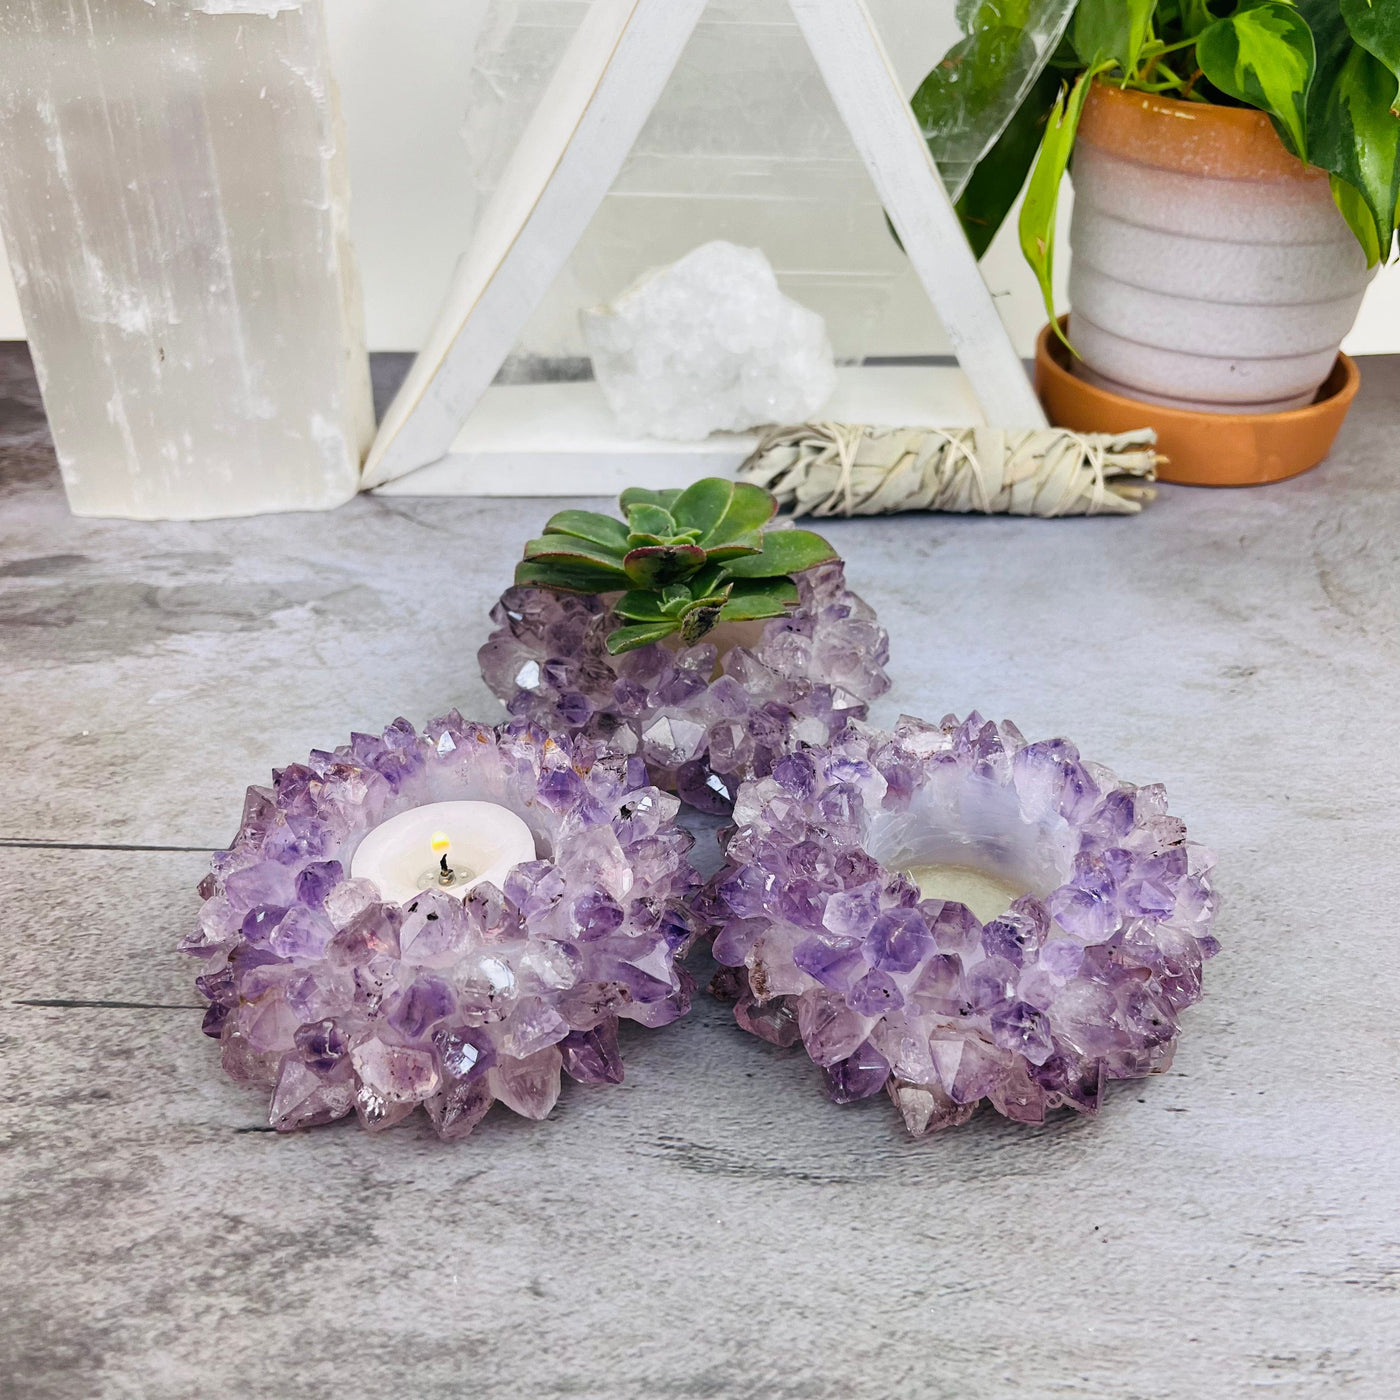 3 Amethyst Point Candle Holders on a table from a side view